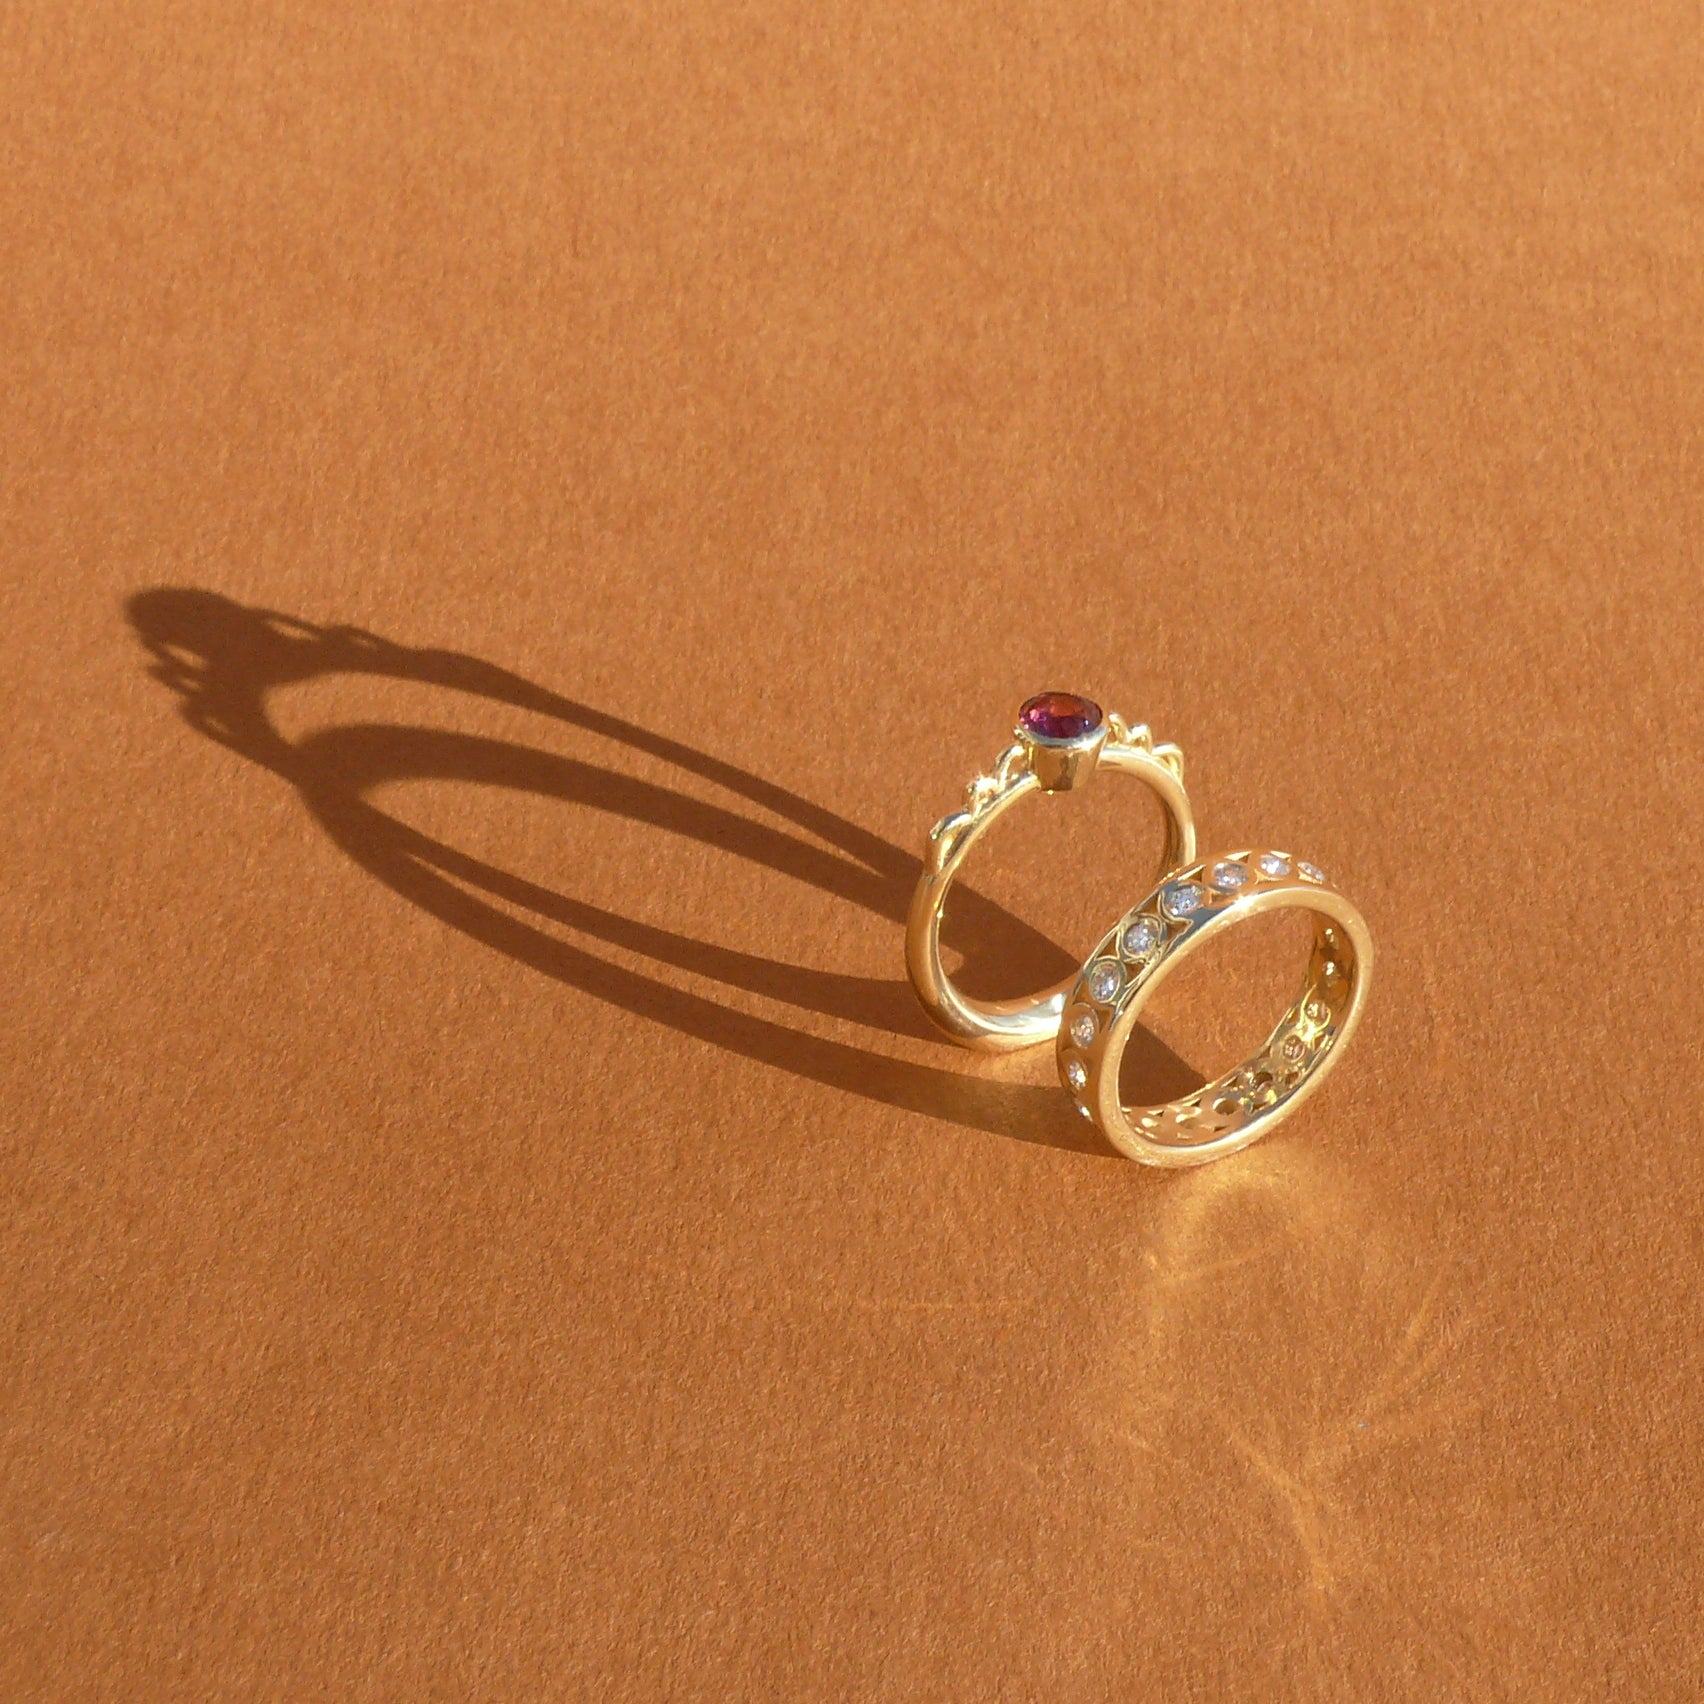 5mm fuchsia rhodolite garnet bezel set atop a 14k recycled yellow gold ring band with a silhouette of a vessel with round handles